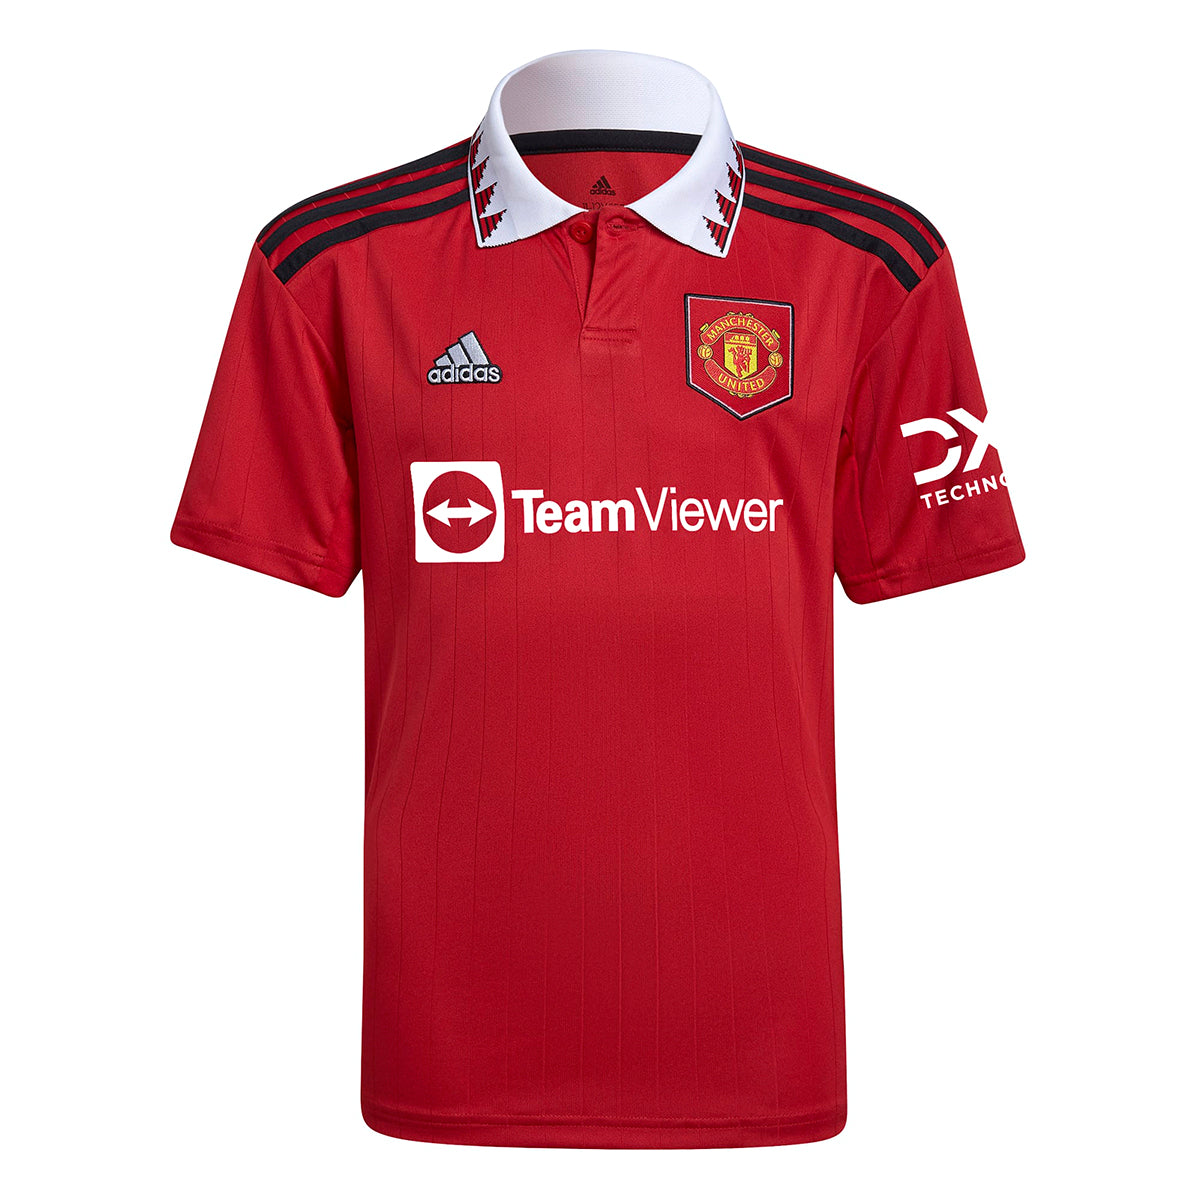 MANCHESTER UNITED 23/24 AWAY KIT OUT NOW - Adidas Ukraine